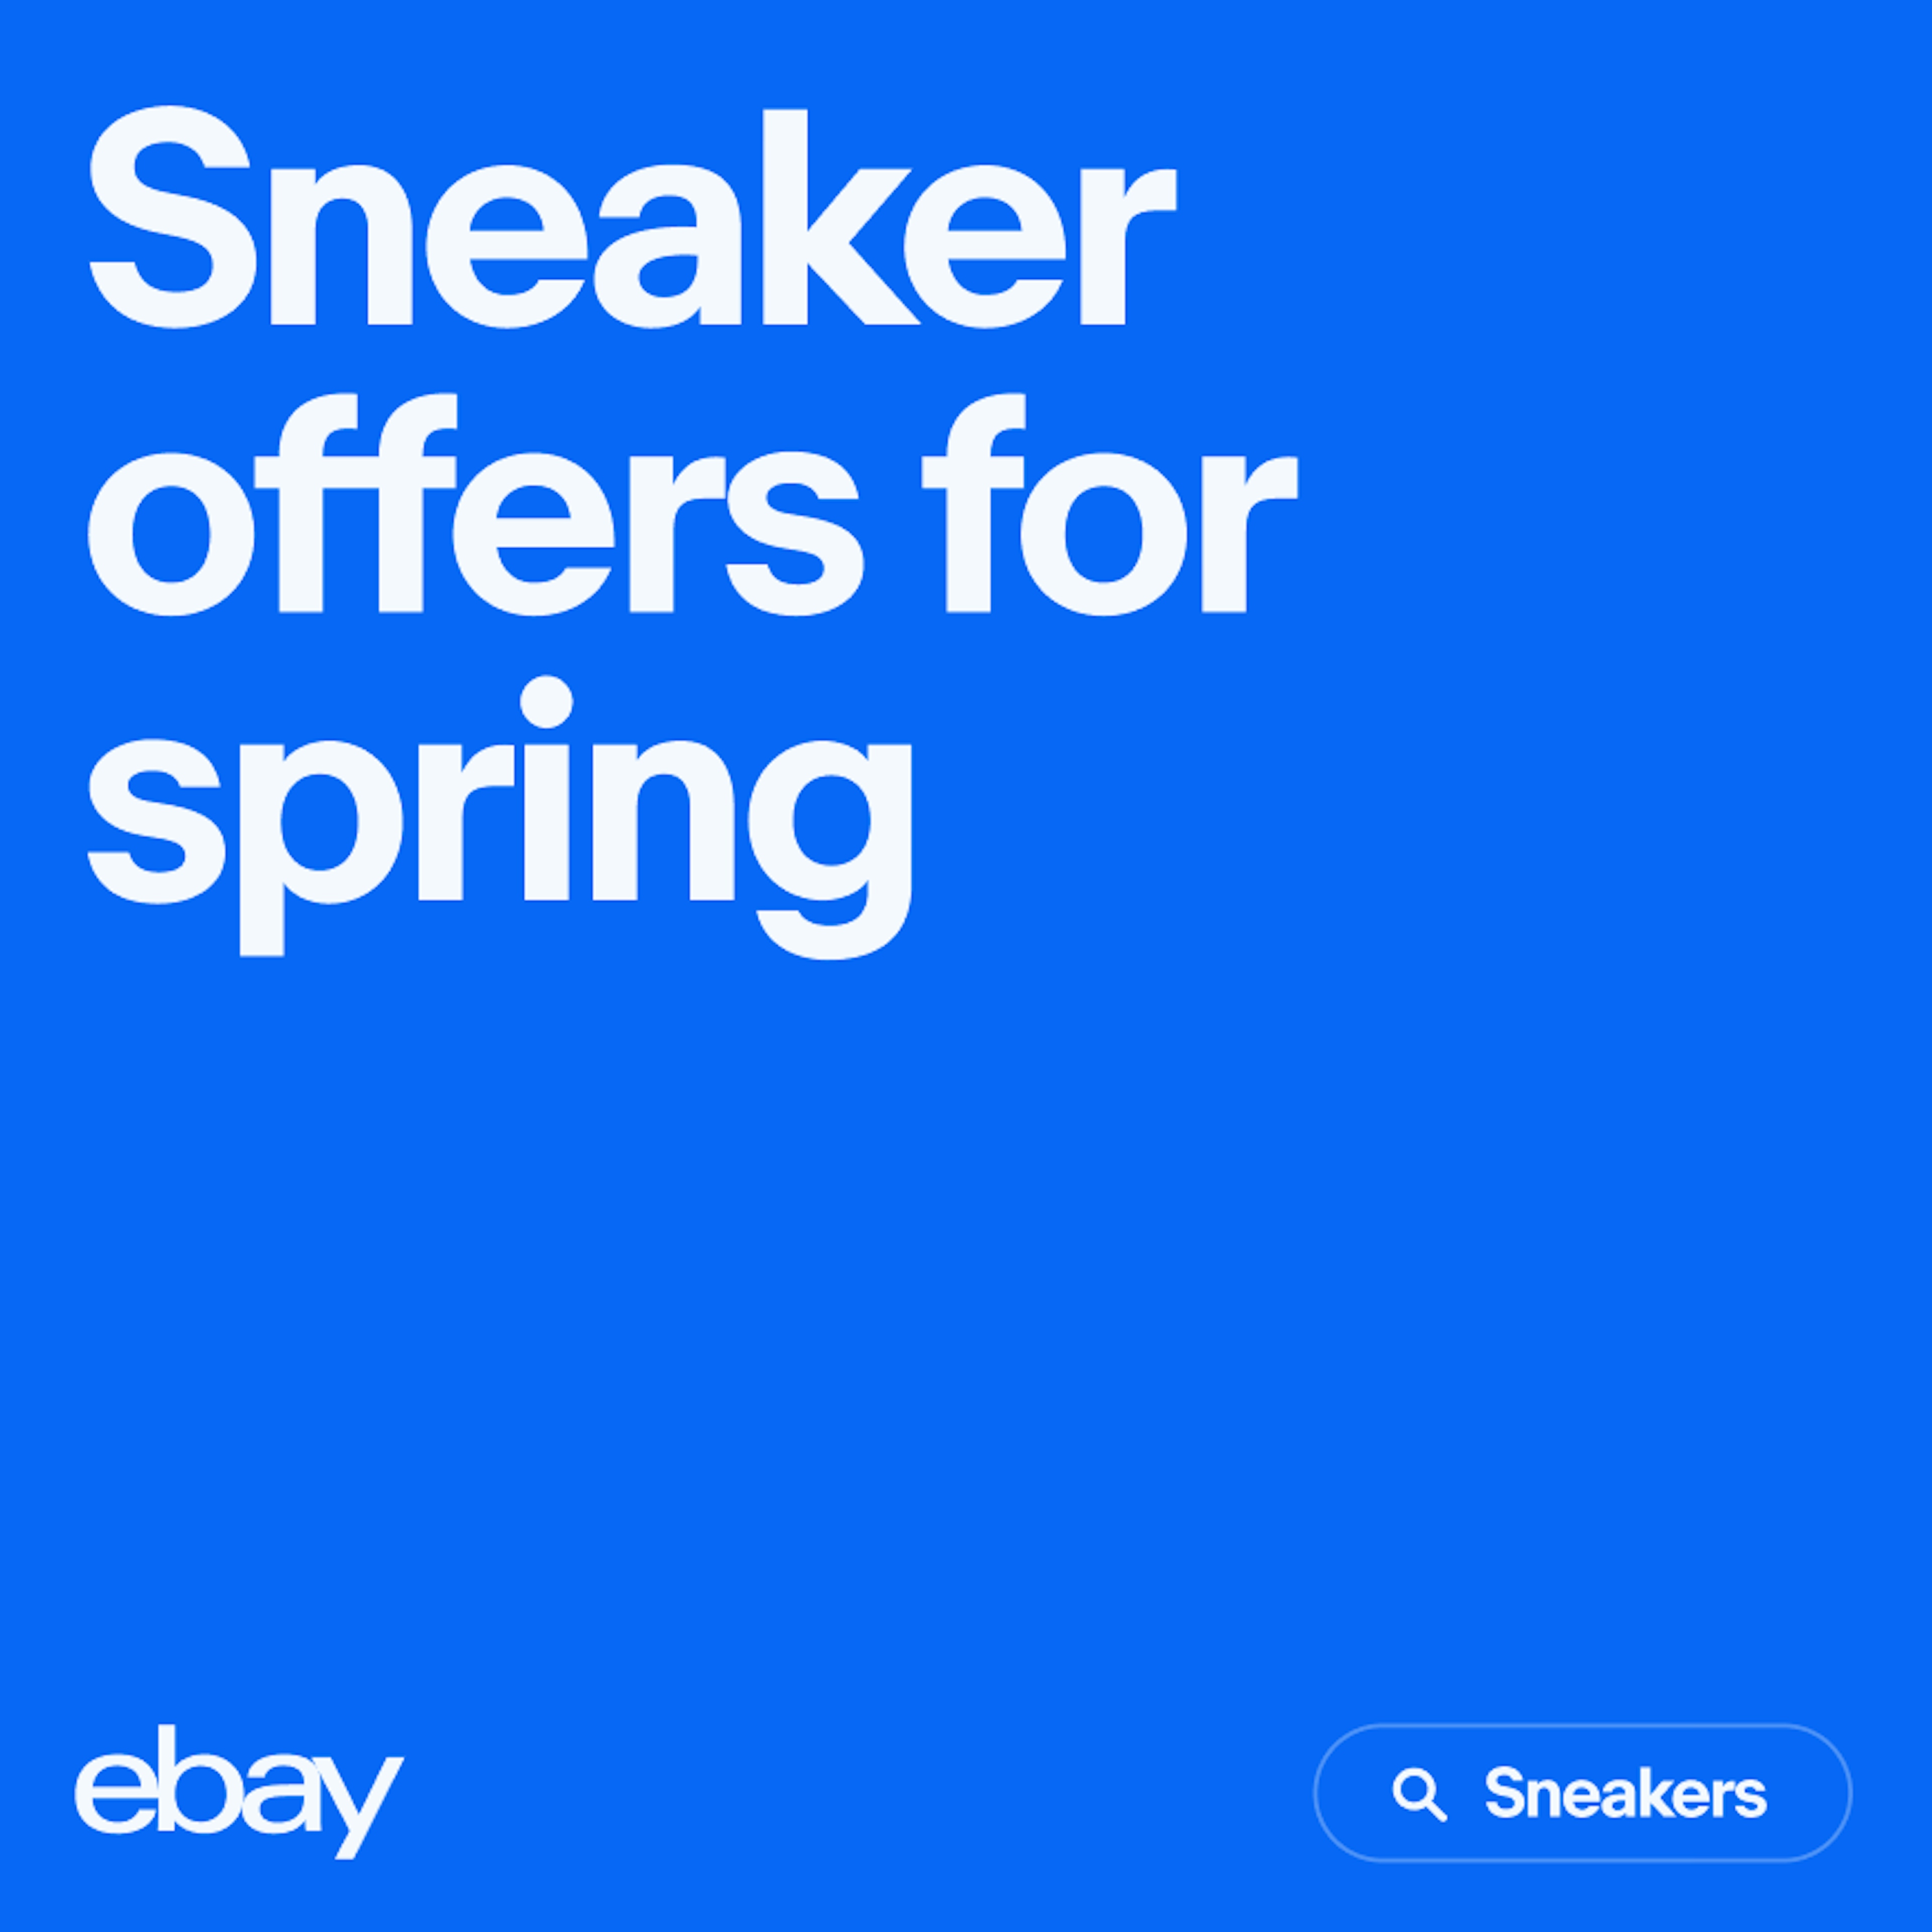 A type-based ad for sneakers. The headline text is solid white on a blue background.